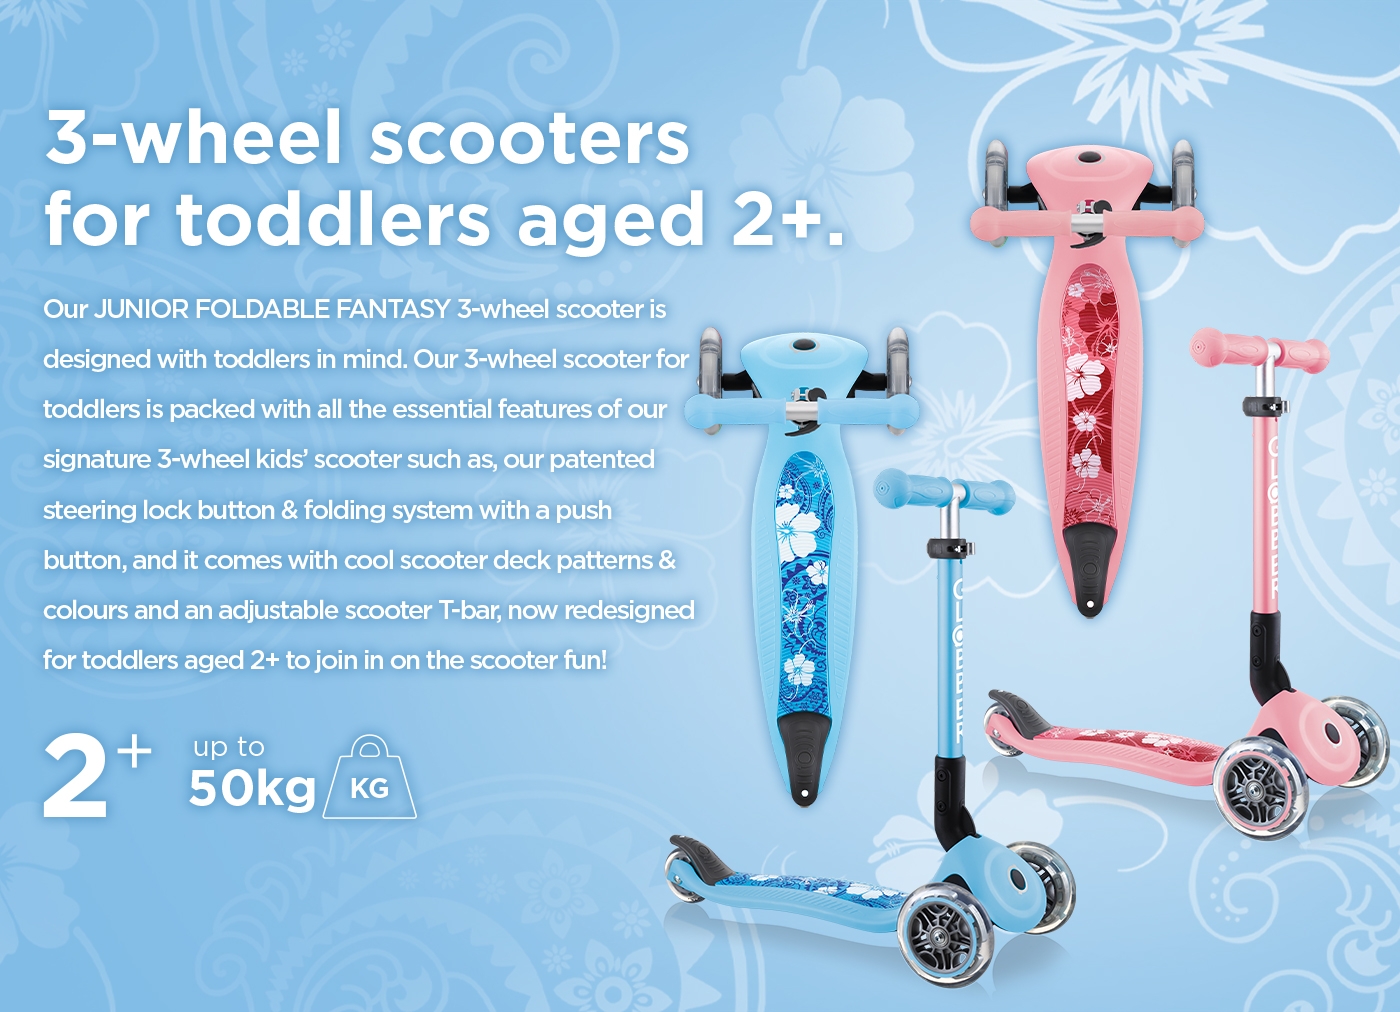 3-wheel scooters for toddlers aged 2+. Our JUNIOR FOLDABLE FANTASY 3-wheel scooter is designed with toddlers in mind. Our 3-wheel scooter for toddlers is packed with all the essential features of our signature 3-wheel kids’ scooter such as, our patented steering lock button & folding system with a push button, and it comes with cool scooter deck patterns & colours and an adjustable scooter T-bar, now redesigned for toddlers aged 2+ to join in on the scooter fun! 